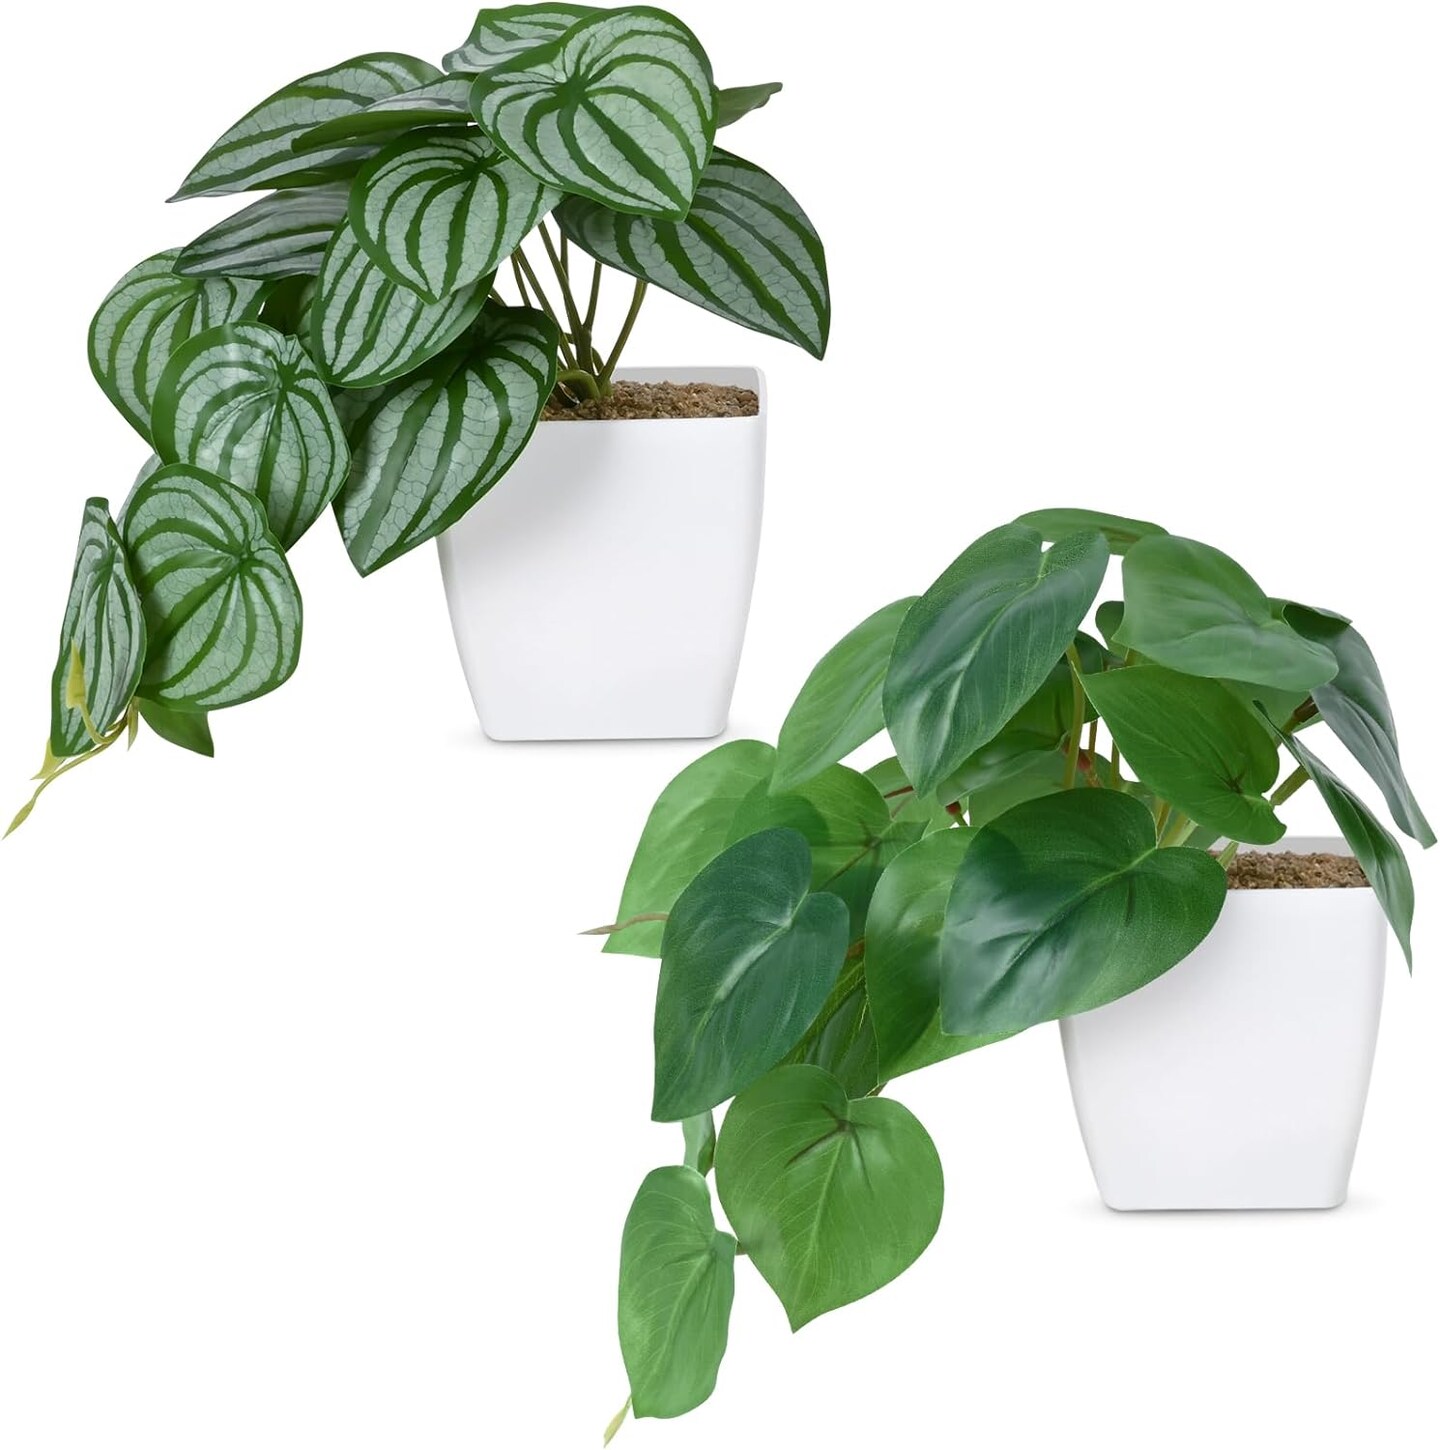 Artificial potted plants Fake Plant in Pot Mini Fake Plants Small Faux Plants for Desk Office Living Room Decor